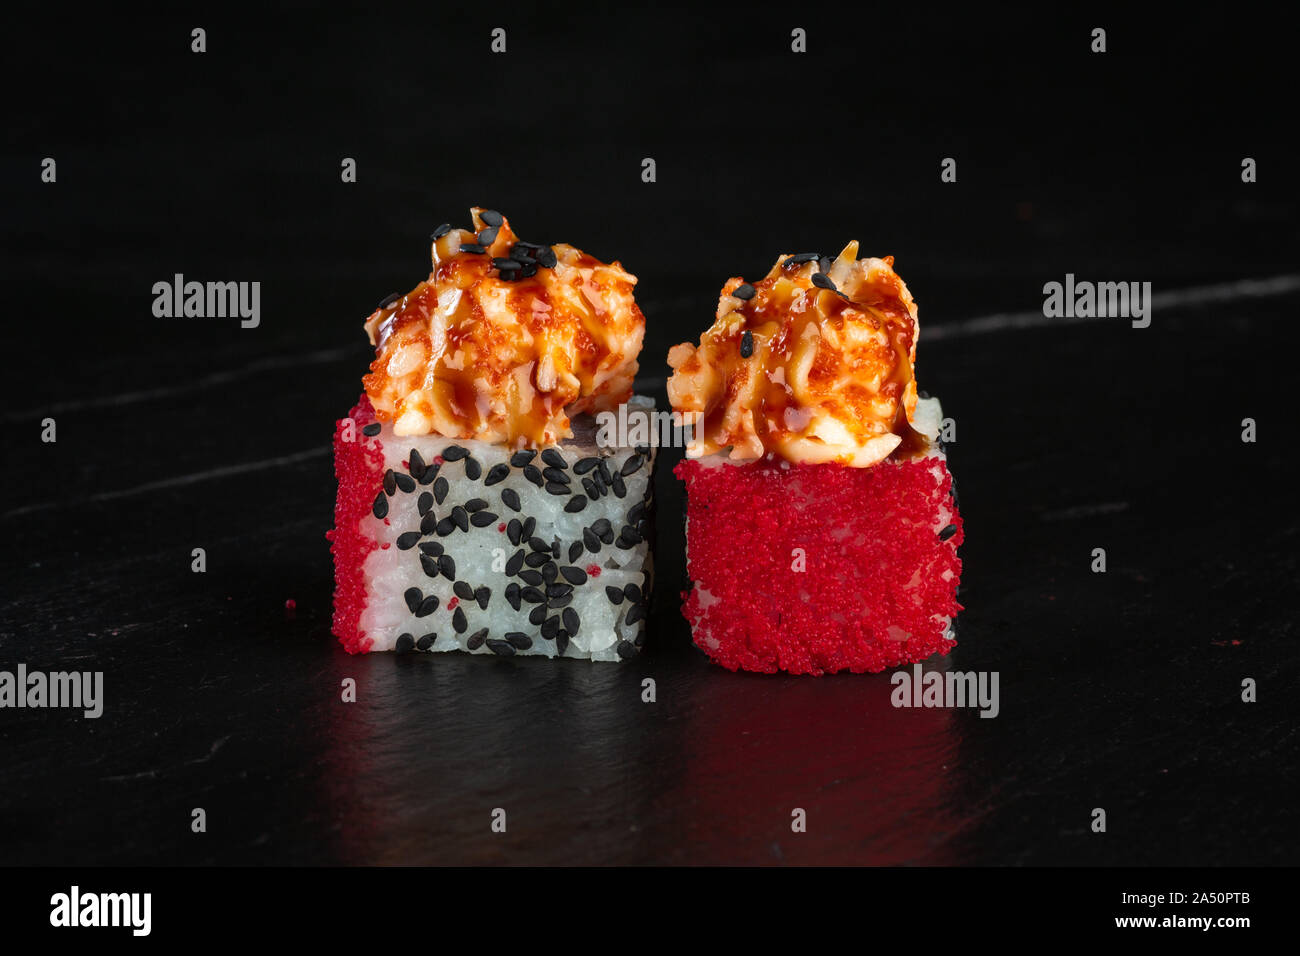 pair of sushi rolls chef de luxe close-up on a dark background Stock Photo